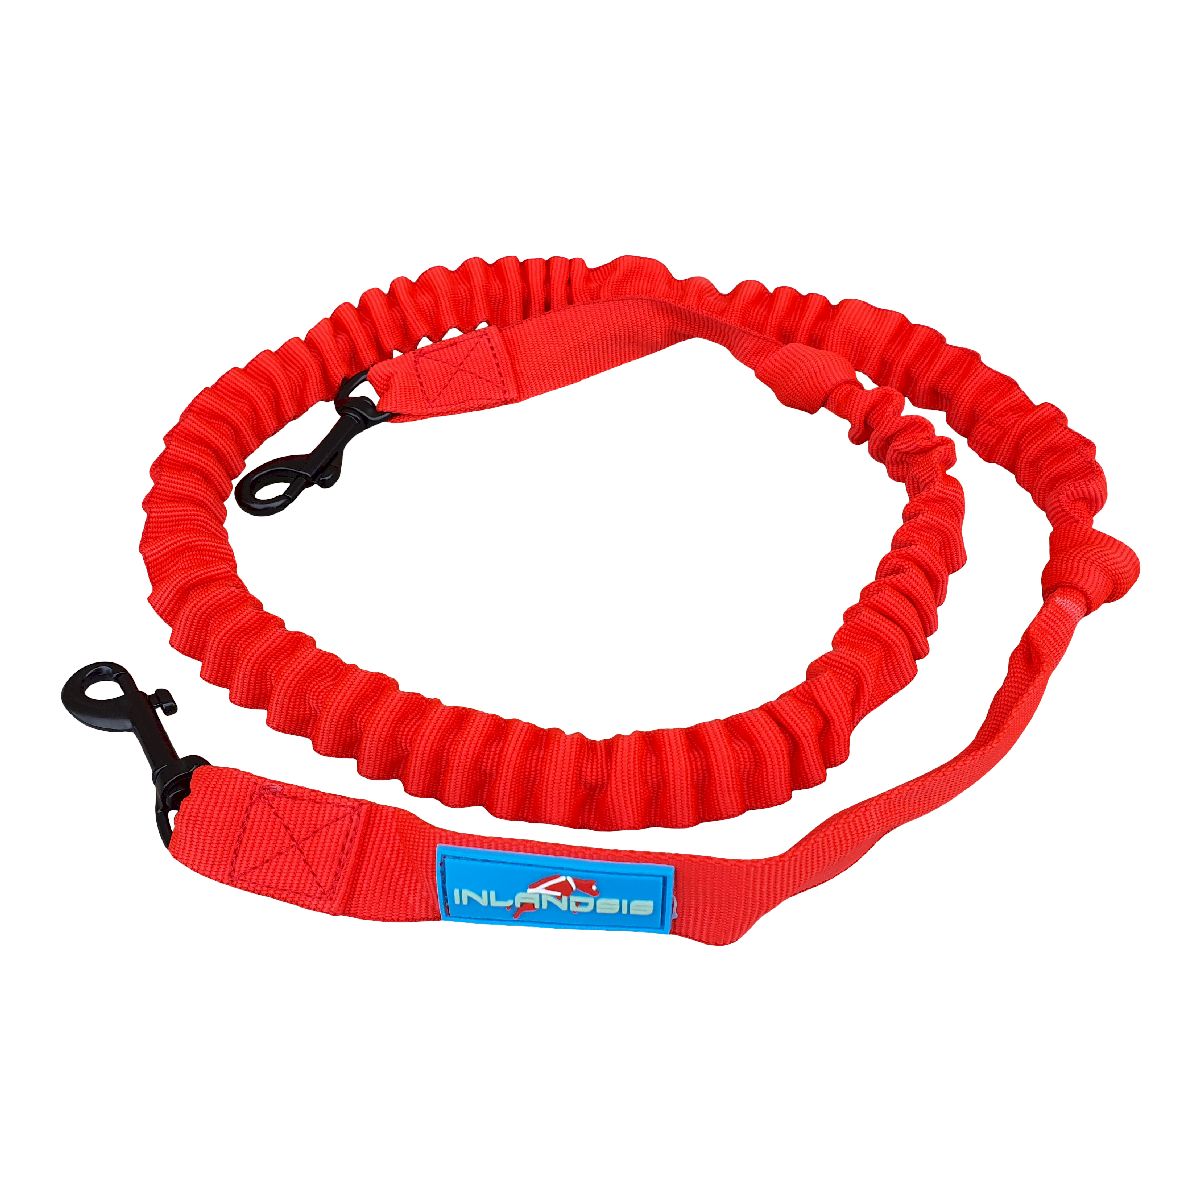 Inlandsis Crosser 2 Small Dogs - Laisse pour chien | Hardloop